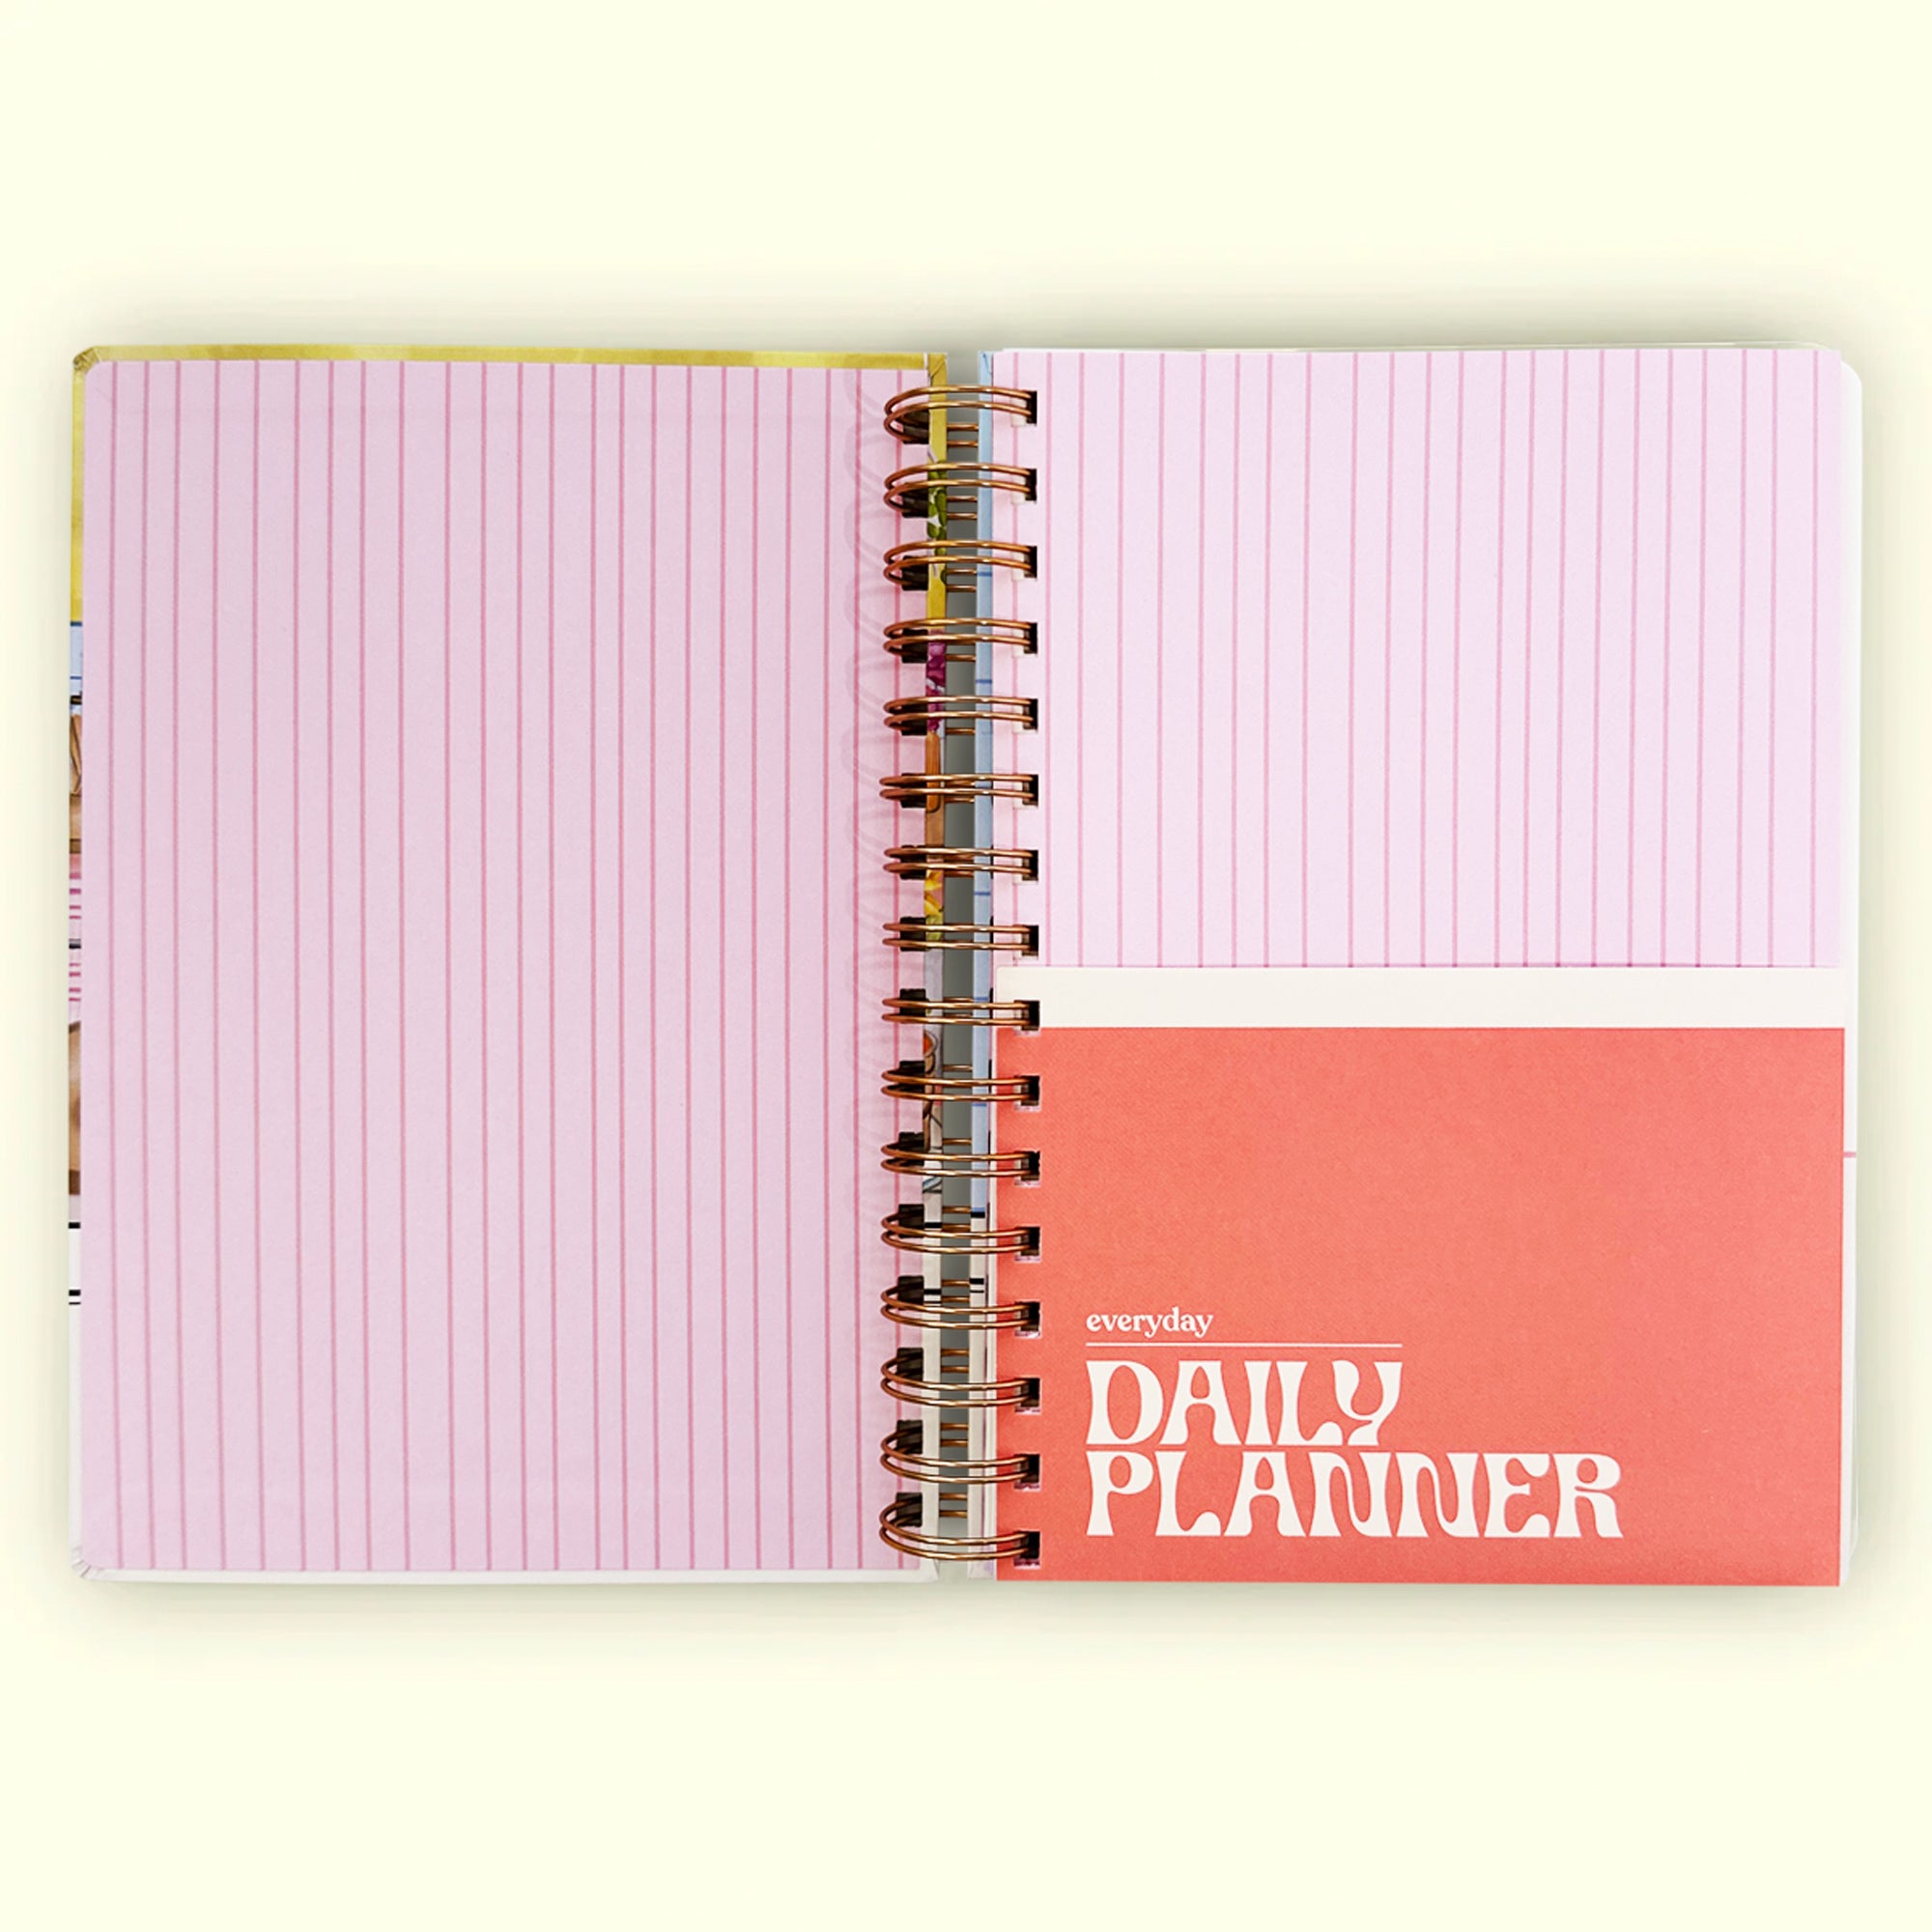 Daily Planner | Everyday